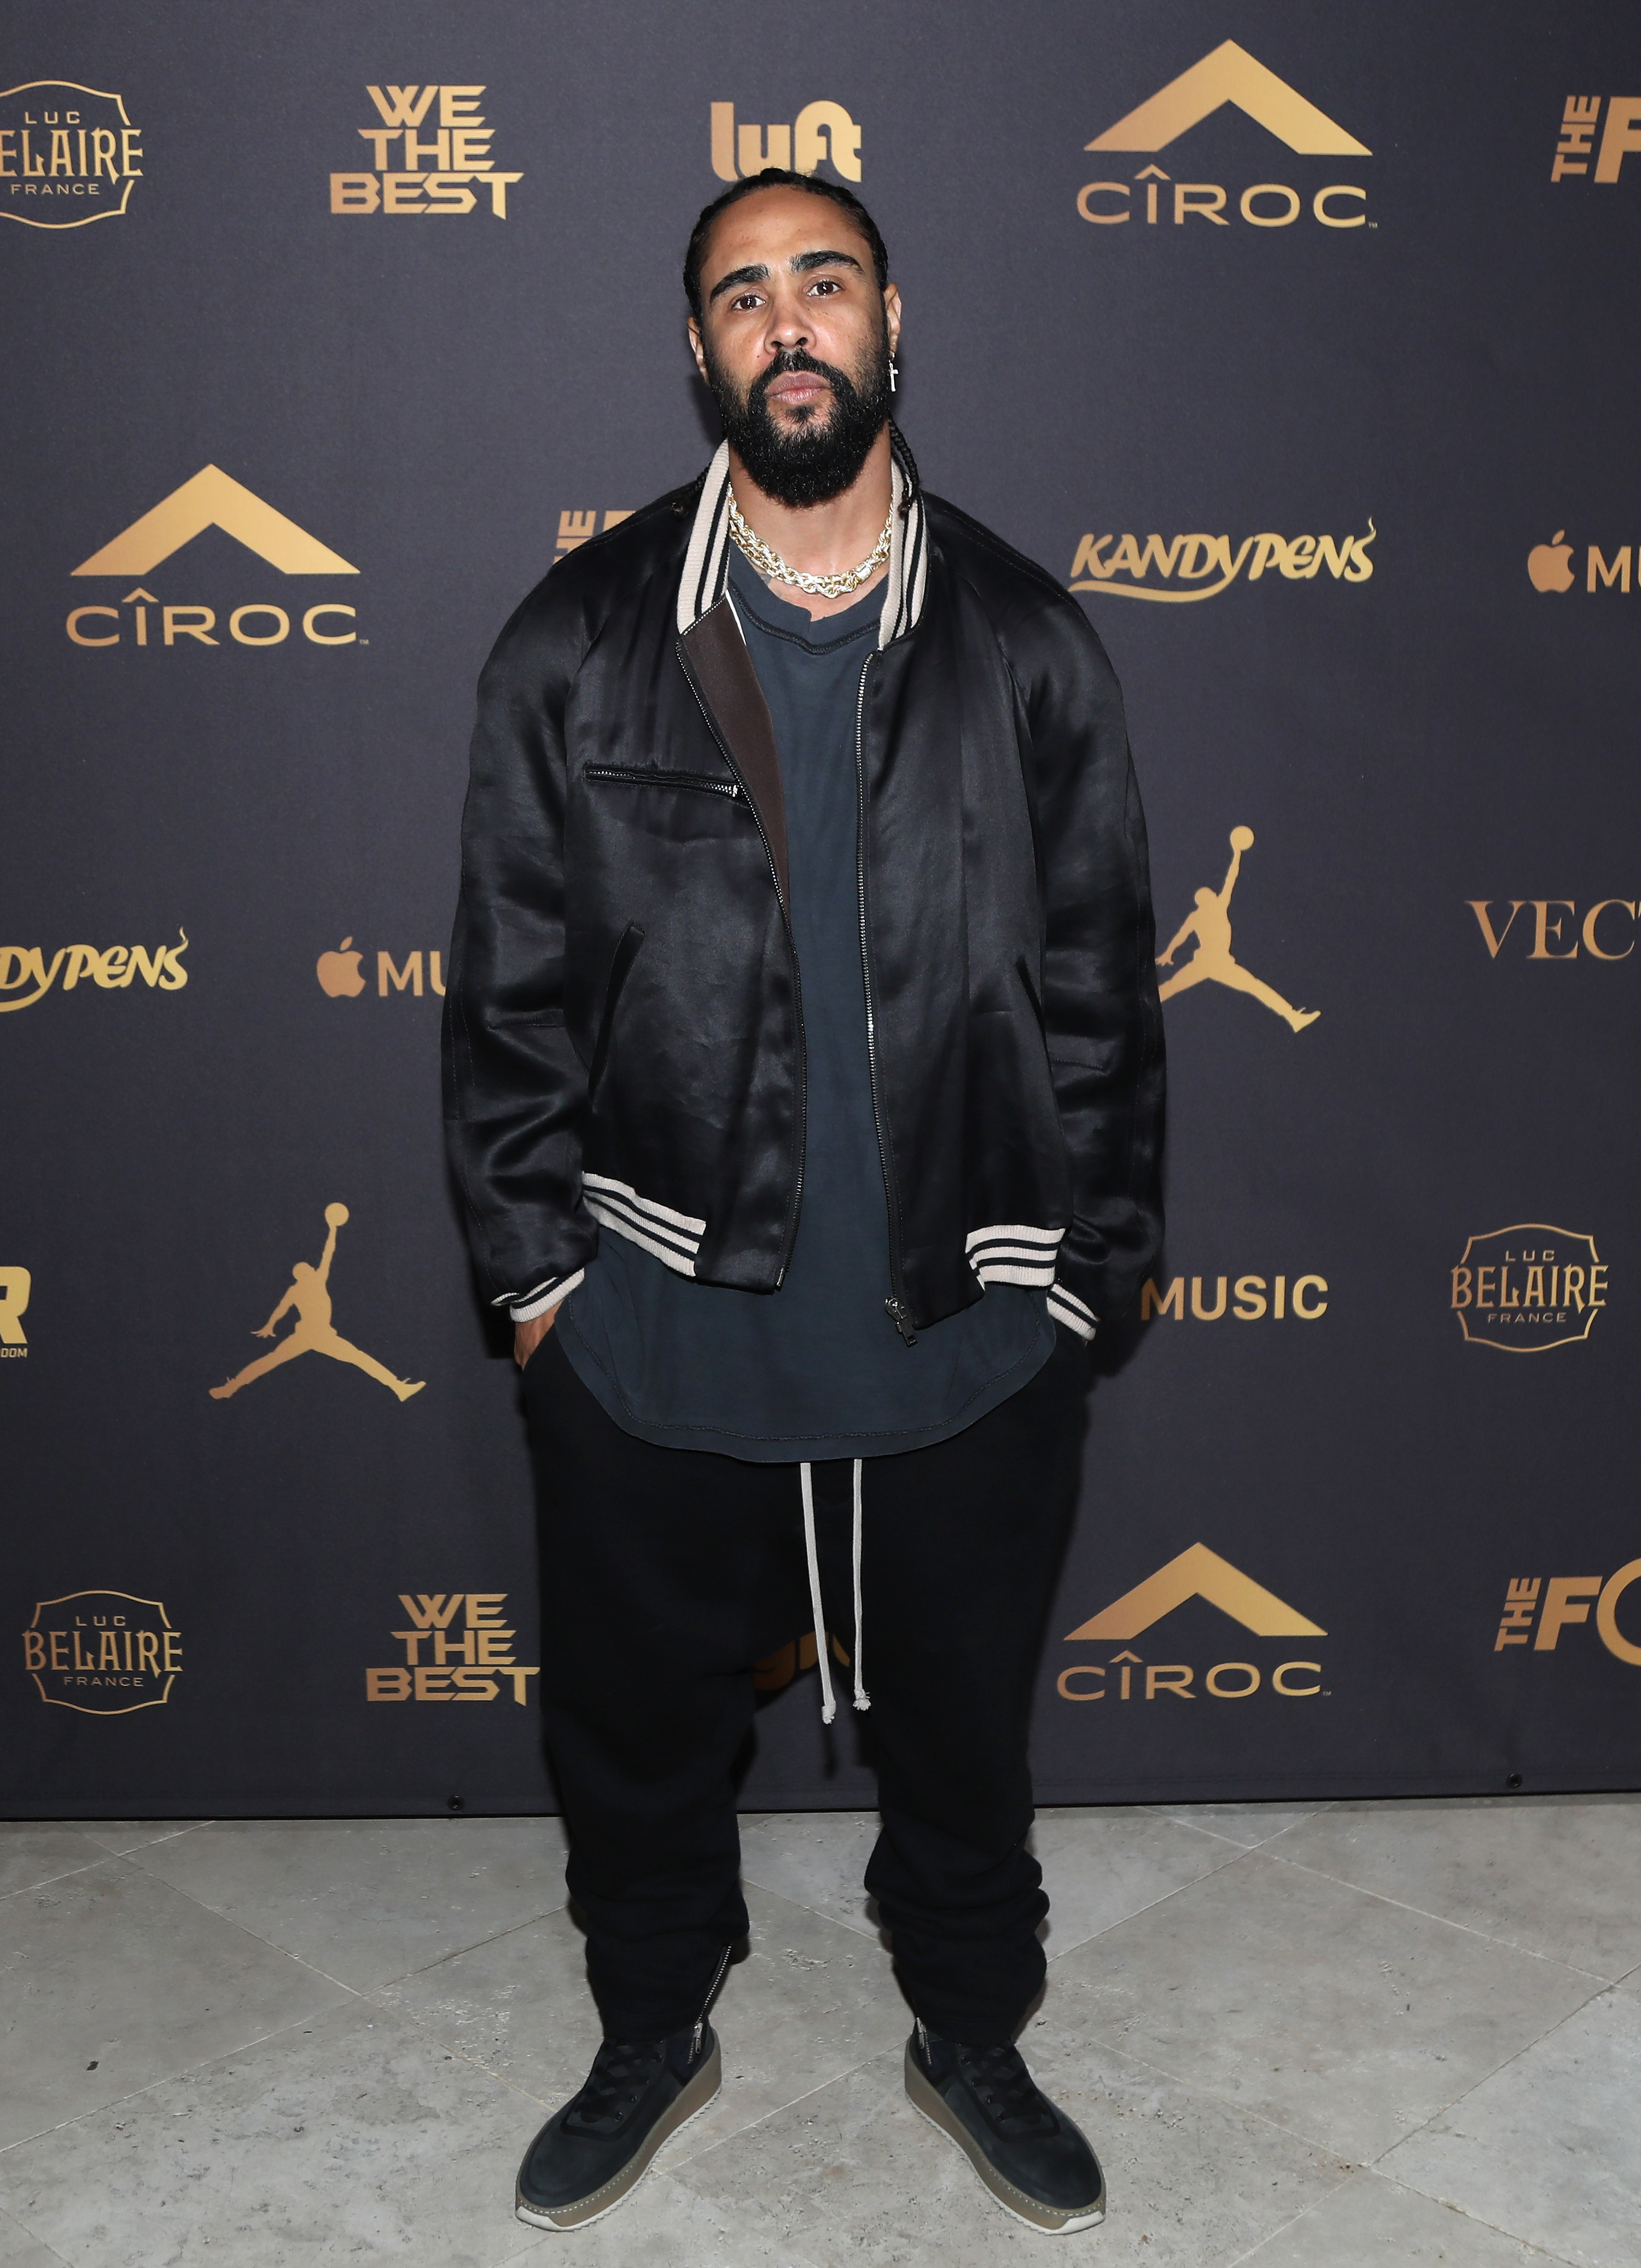 New F.O.G. x Vans Are Coming In 2017 According to Jerry Lorenzo